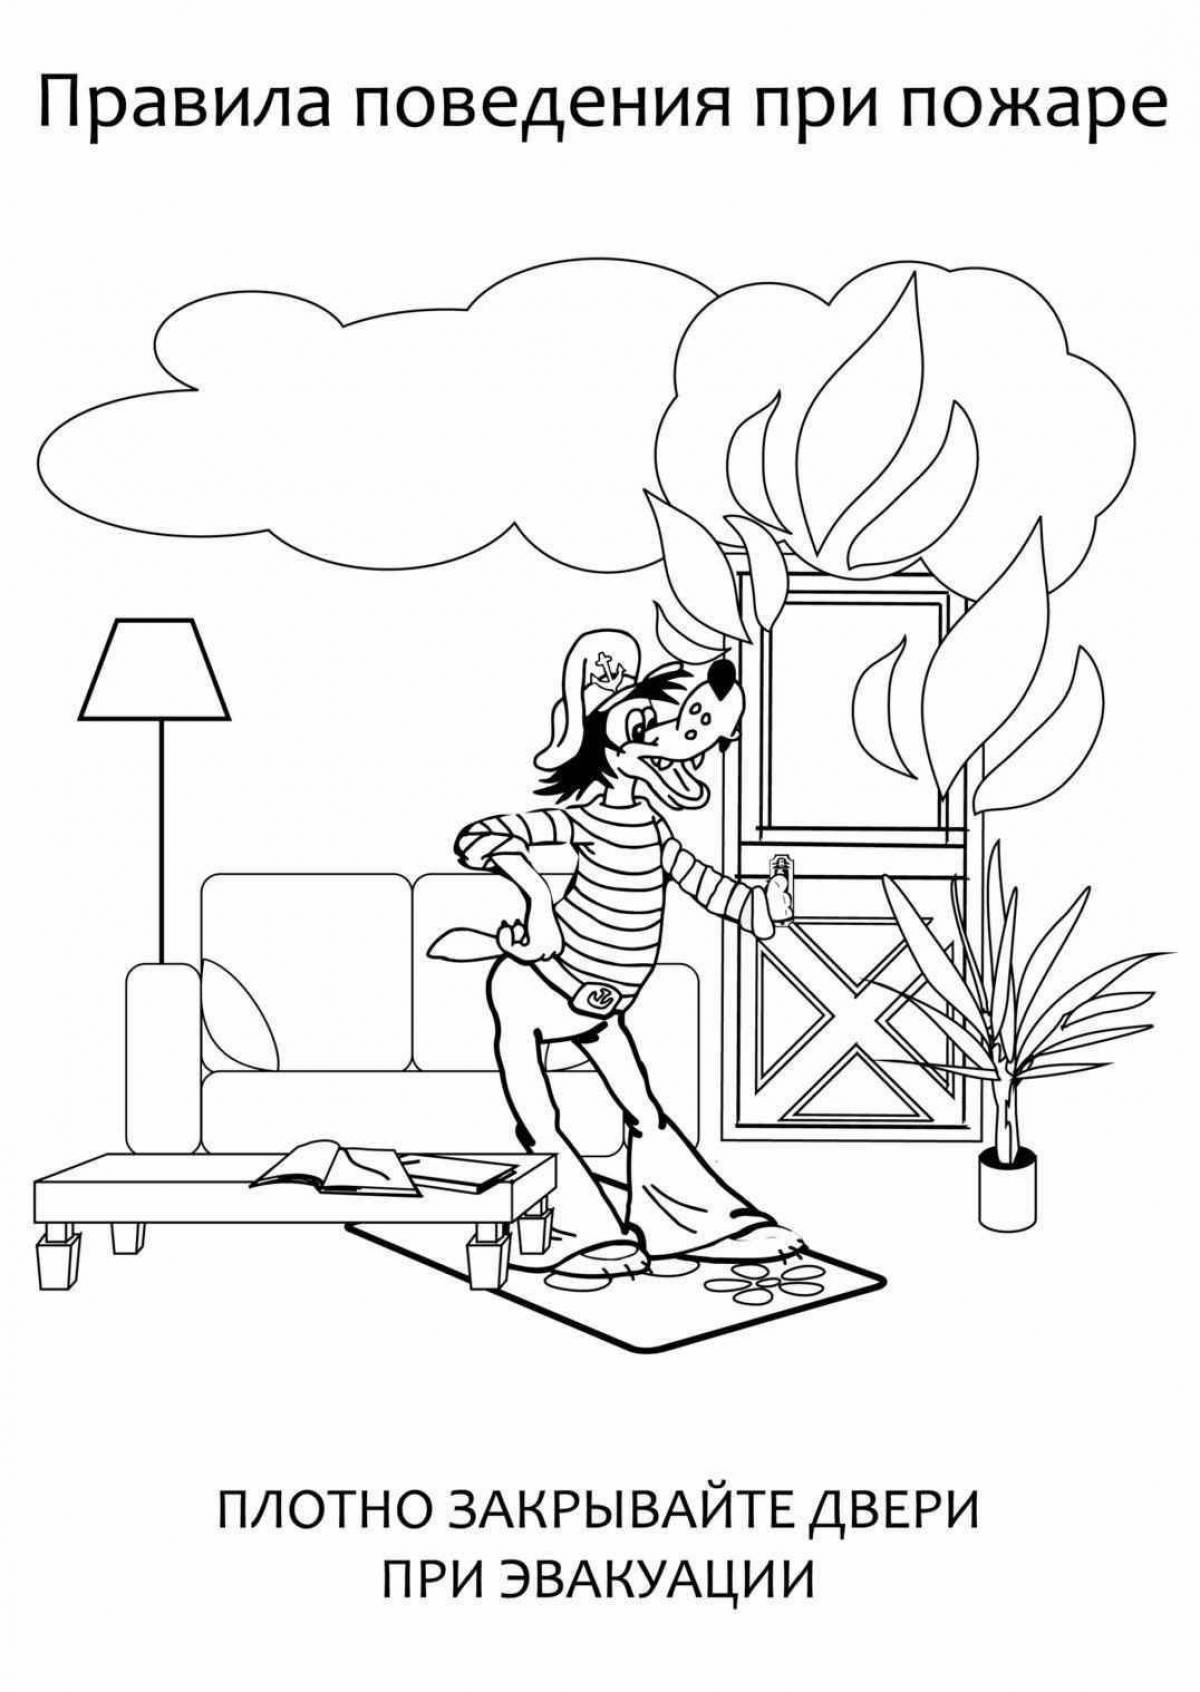 Creative fire safety coloring book for kindergarten